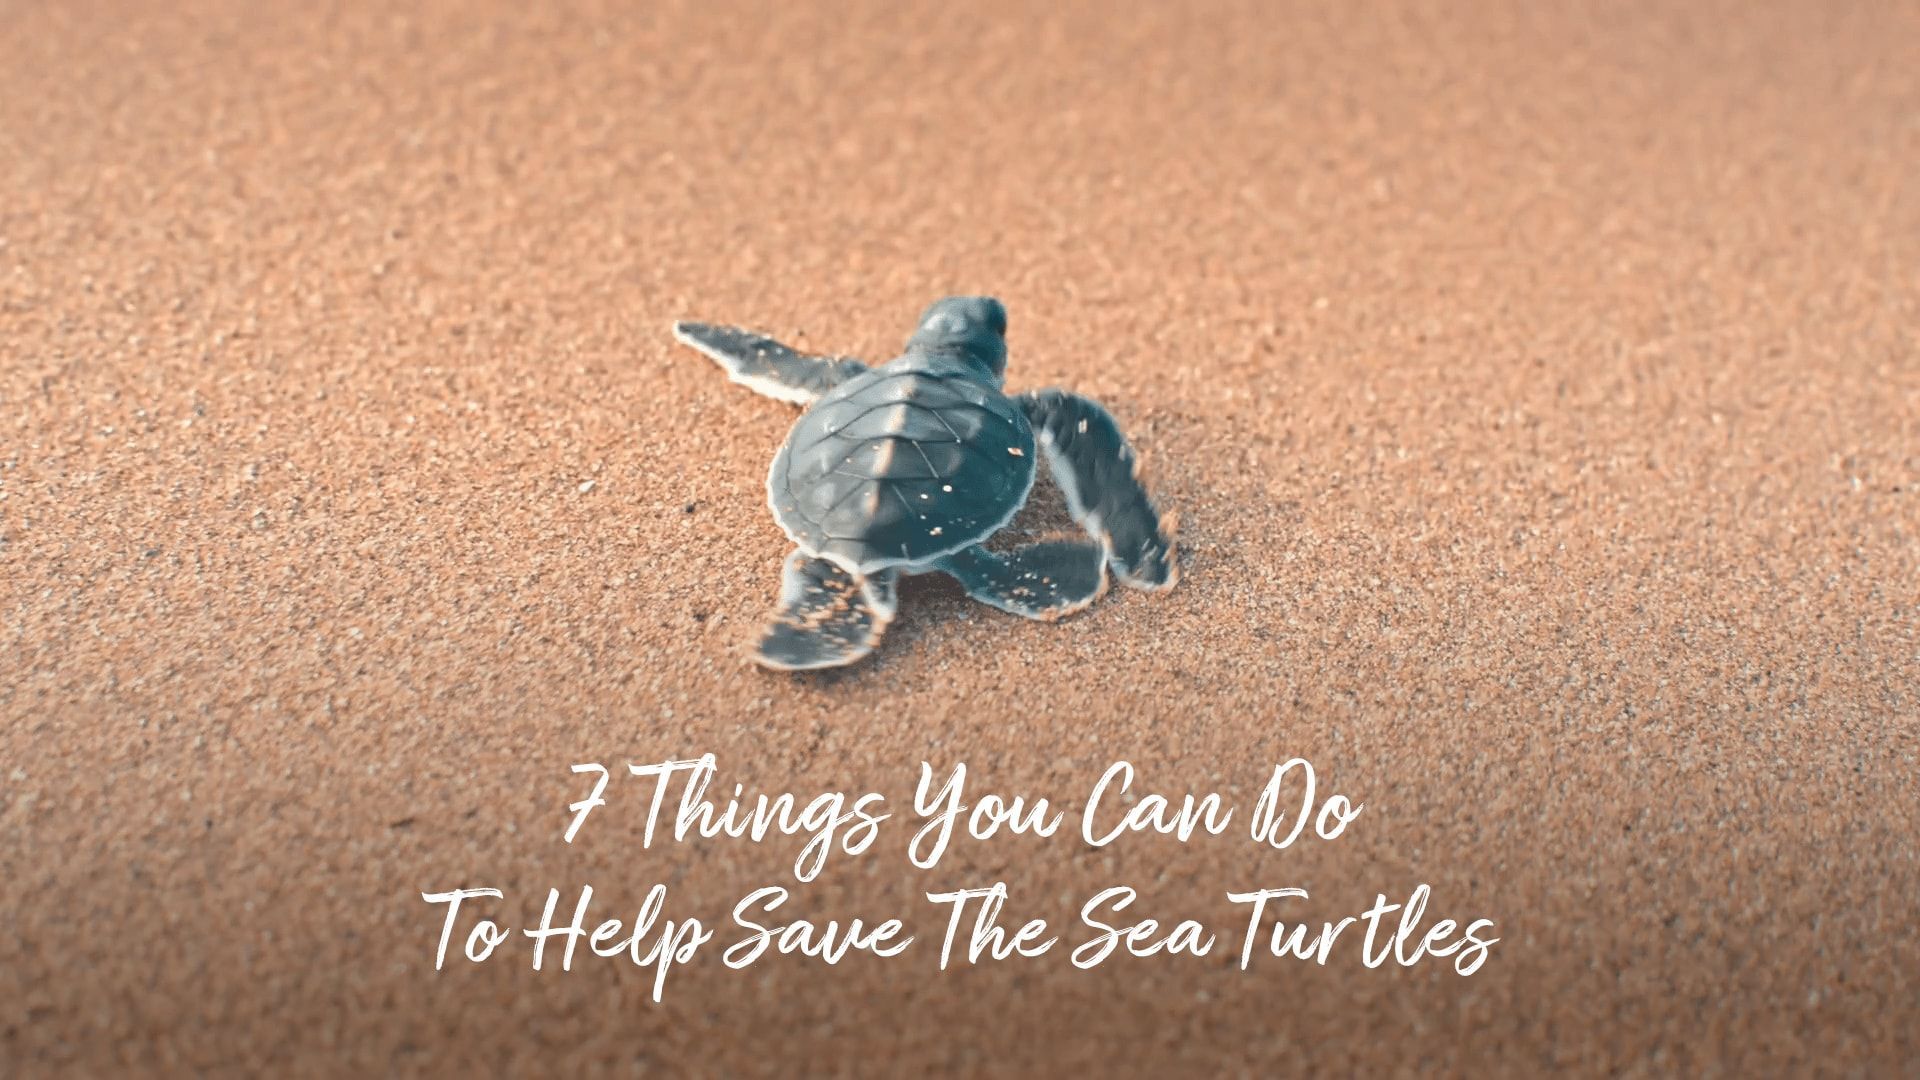 A baby sea turtle crawling on the sand with the words 